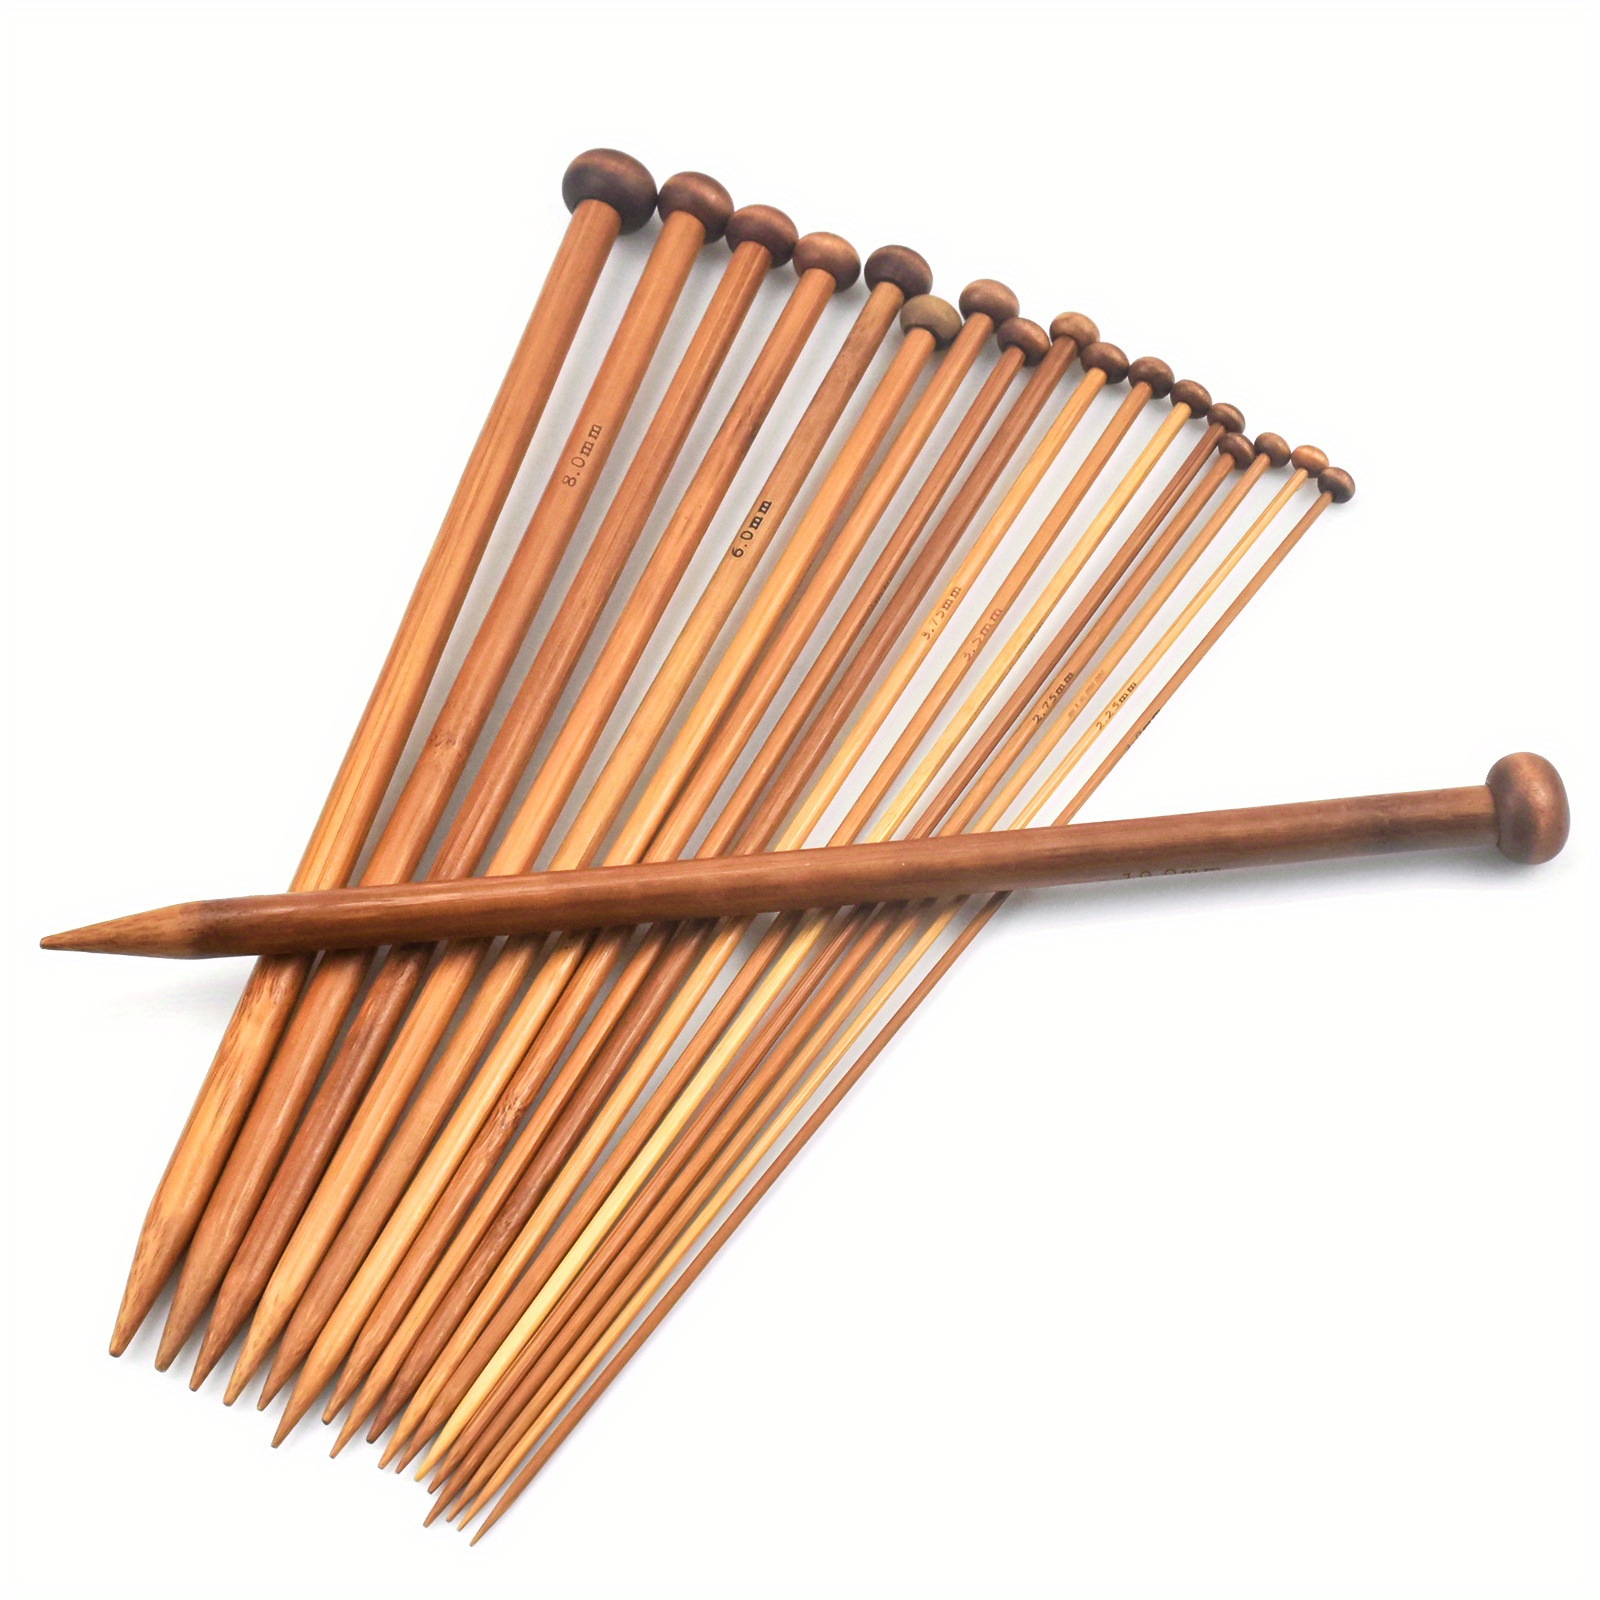 Double Pointed , 75 Pcs Bamboo Knitting Needles Set, 15 Sizes from  2.0mm-10.0mm(8 Inches Length)+ 4Pcs Knitting Needles Point Protectors